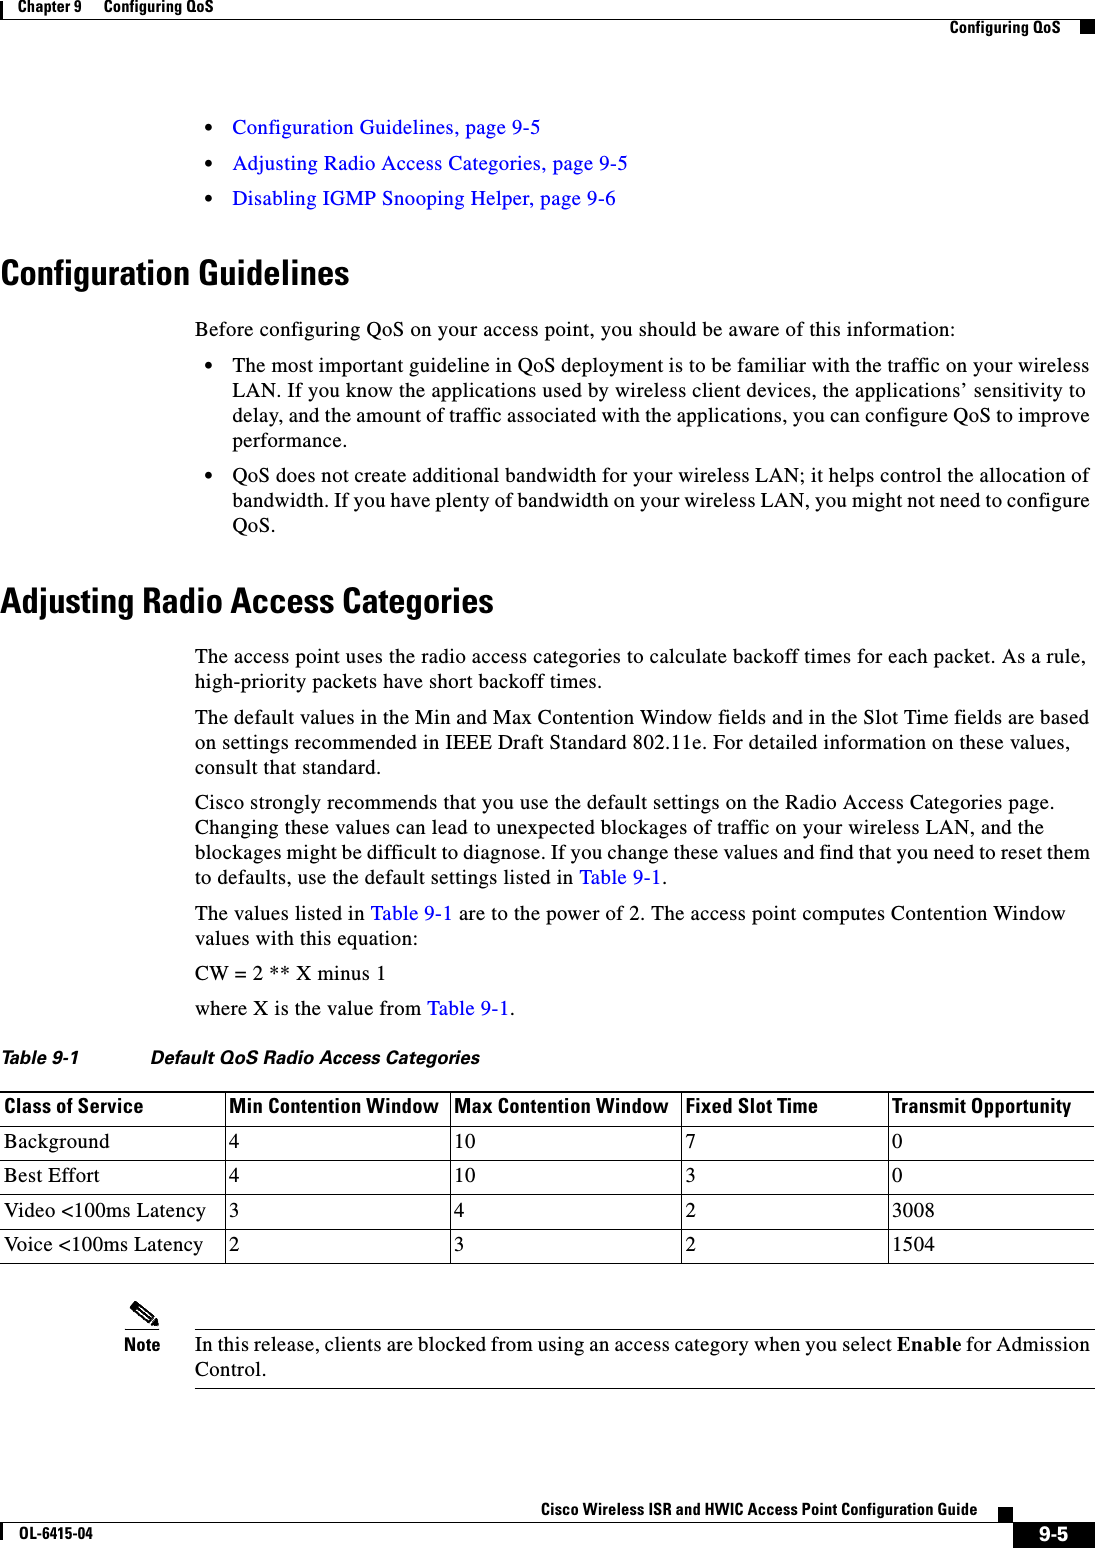  9-5Cisco Wireless ISR and HWIC Access Point Configuration GuideOL-6415-04Chapter 9      Configuring QoS  Configuring QoS  • Configuration Guidelines, page 9-5  • Adjusting Radio Access Categories, page 9-5  • Disabling IGMP Snooping Helper, page 9-6Configuration GuidelinesBefore configuring QoS on your access point, you should be aware of this information:  • The most important guideline in QoS deployment is to be familiar with the traffic on your wireless LAN. If you know the applications used by wireless client devices, the applications’ sensitivity to delay, and the amount of traffic associated with the applications, you can configure QoS to improve performance.  • QoS does not create additional bandwidth for your wireless LAN; it helps control the allocation of bandwidth. If you have plenty of bandwidth on your wireless LAN, you might not need to configure QoS.Adjusting Radio Access CategoriesThe access point uses the radio access categories to calculate backoff times for each packet. As a rule, high-priority packets have short backoff times.The default values in the Min and Max Contention Window fields and in the Slot Time fields are based on settings recommended in IEEE Draft Standard 802.11e. For detailed information on these values, consult that standard.Cisco strongly recommends that you use the default settings on the Radio Access Categories page. Changing these values can lead to unexpected blockages of traffic on your wireless LAN, and the blockages might be difficult to diagnose. If you change these values and find that you need to reset them to defaults, use the default settings listed in Table 9-1.The values listed in Table 9-1 are to the power of 2. The access point computes Contention Window values with this equation:CW = 2 ** X minus 1where X is the value from Table 9-1.Note In this release, clients are blocked from using an access category when you select Enable for Admission Control.Ta b l e  9-1 Default QoS Radio Access Categories Class of Service Min Contention Window Max Contention Window Fixed Slot Time Transmit OpportunityBackground 410 7 0Best Effort 410 3 0Video &lt;100ms Latency 3 4 2 3008Vo ic e   &lt;1 0 0m s   La t en cy 2 3 2 1504